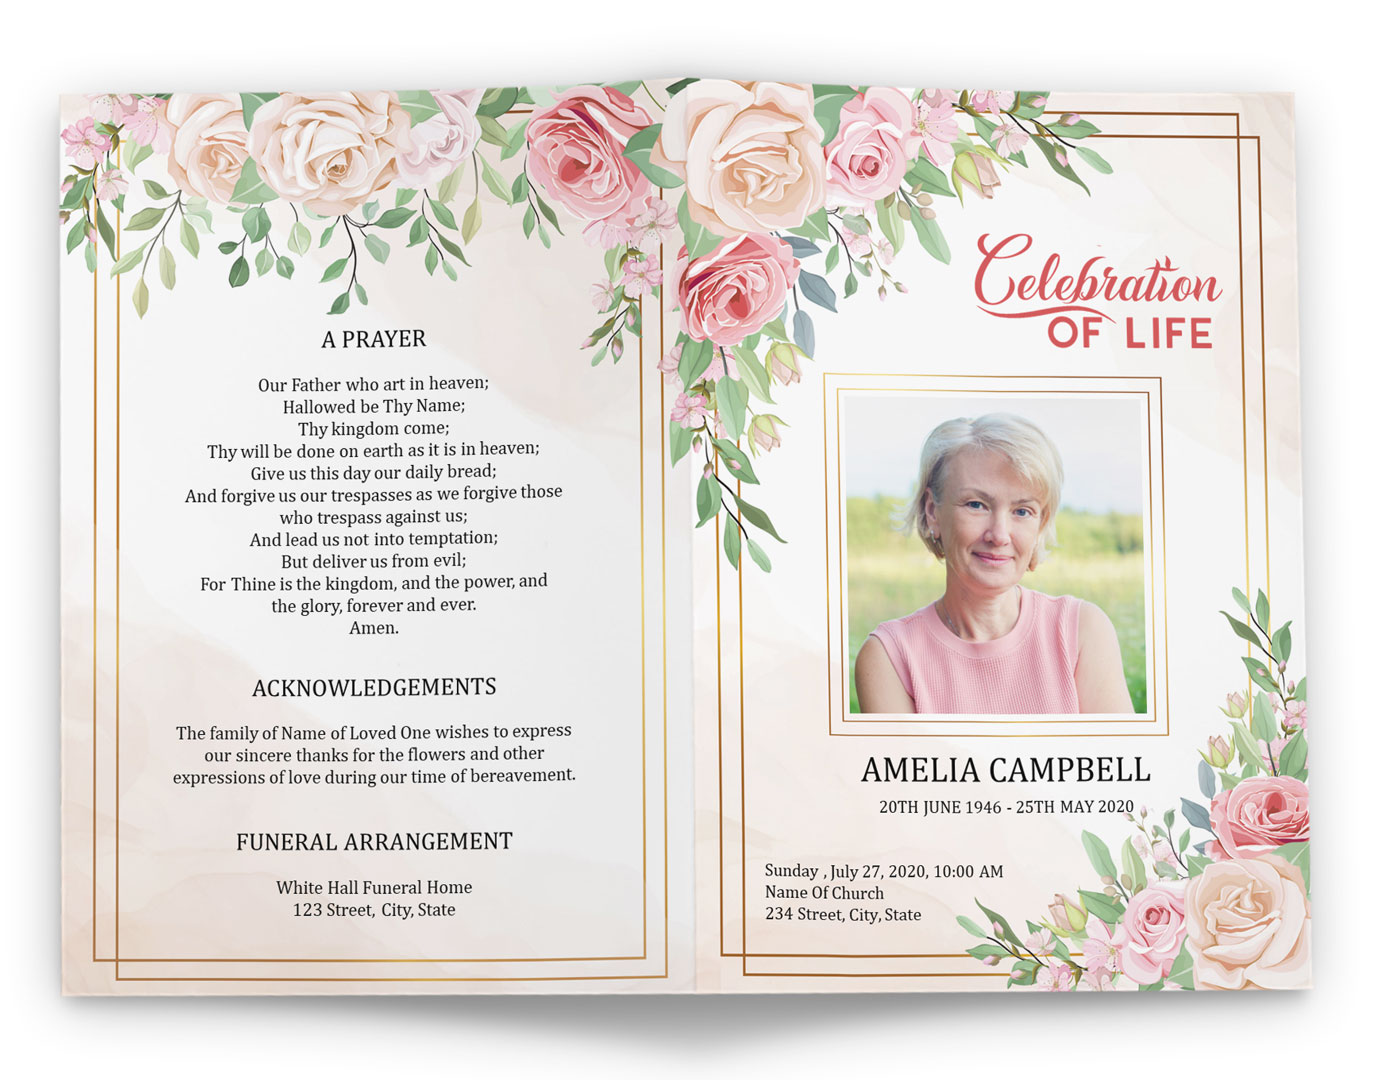 Celebration Of Life Program Template With Roses Design Download Now 